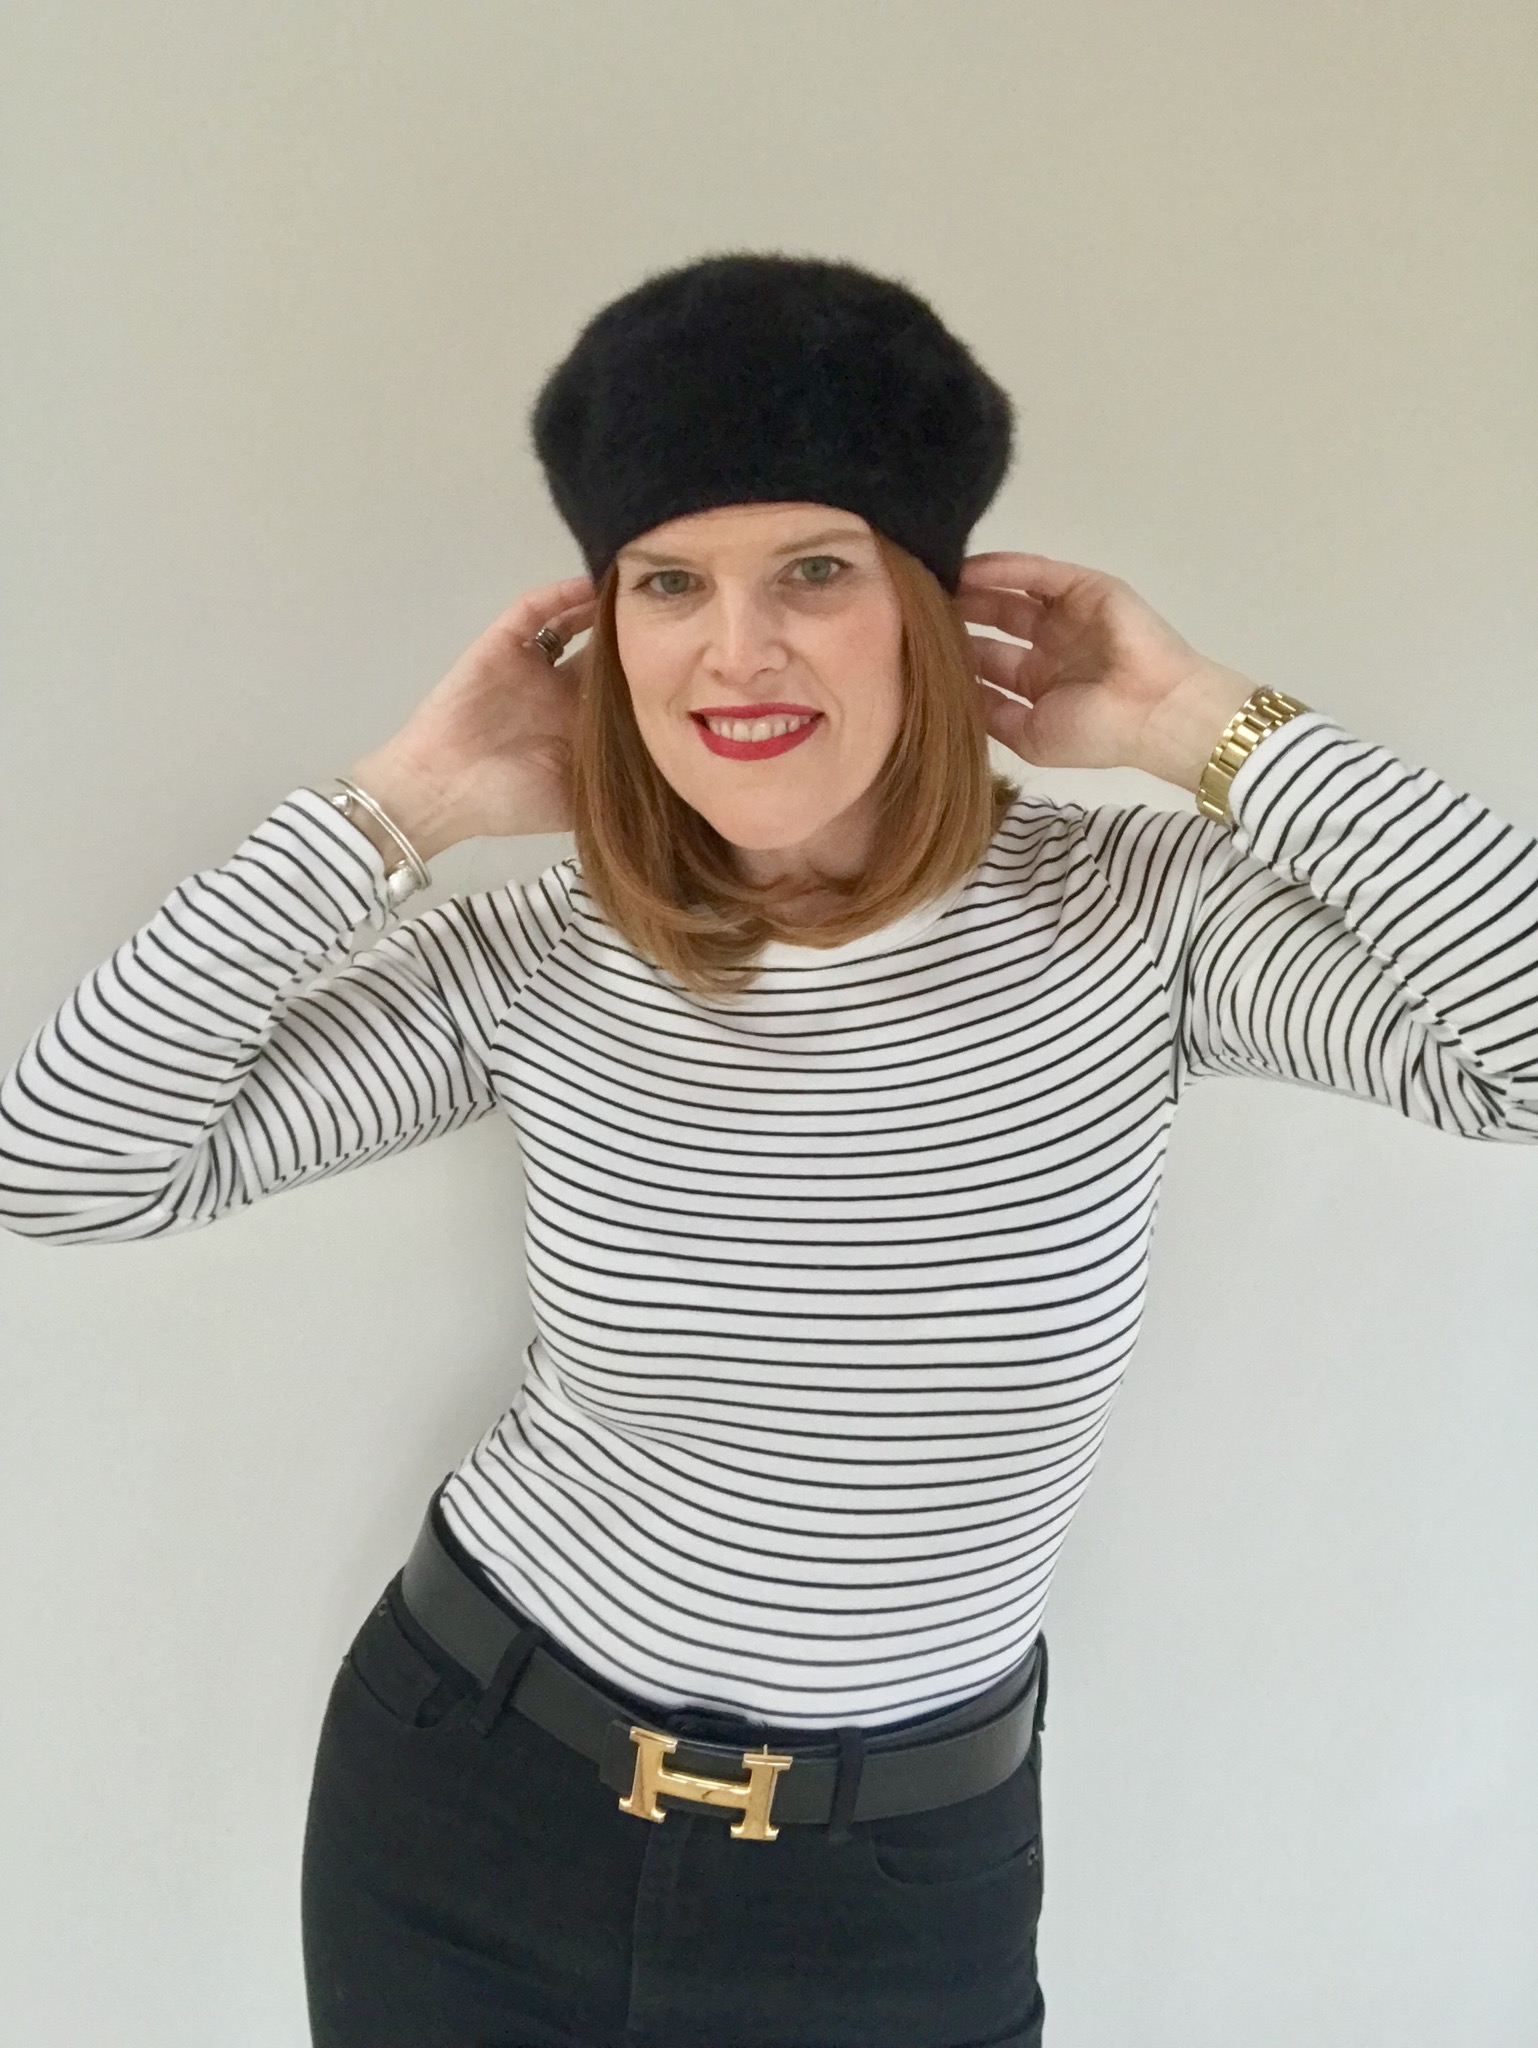 Classic French Chic Stripes Look & $200 Target Gift Card Giveaway